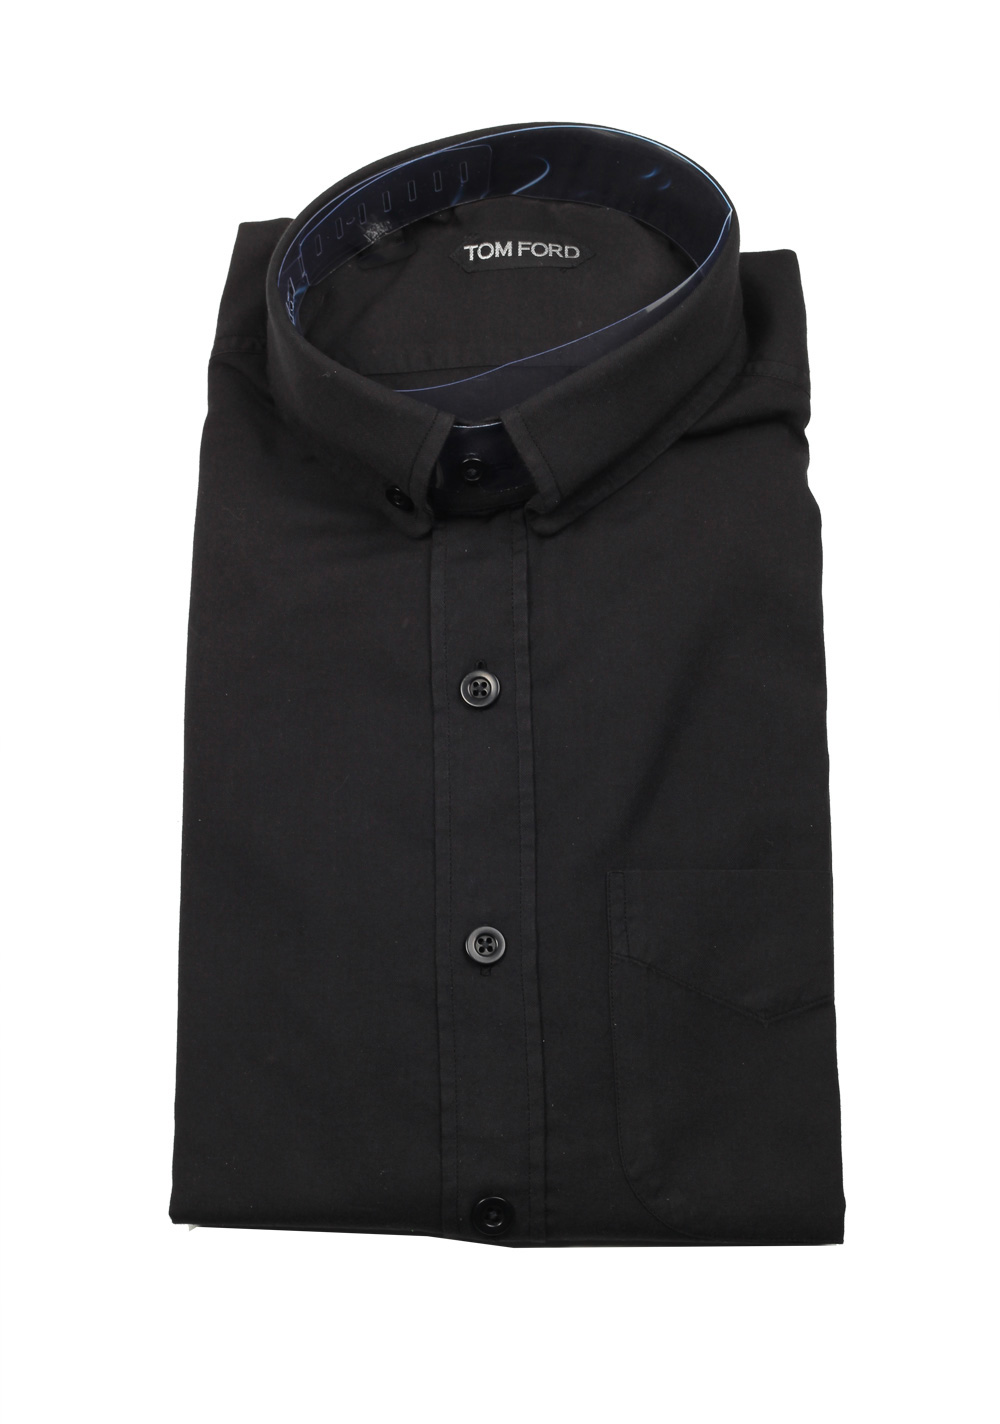 TOM FORD Solid Black Casual Button Down Shirt Size 40/ 15,75 U.S. | Costume Limité